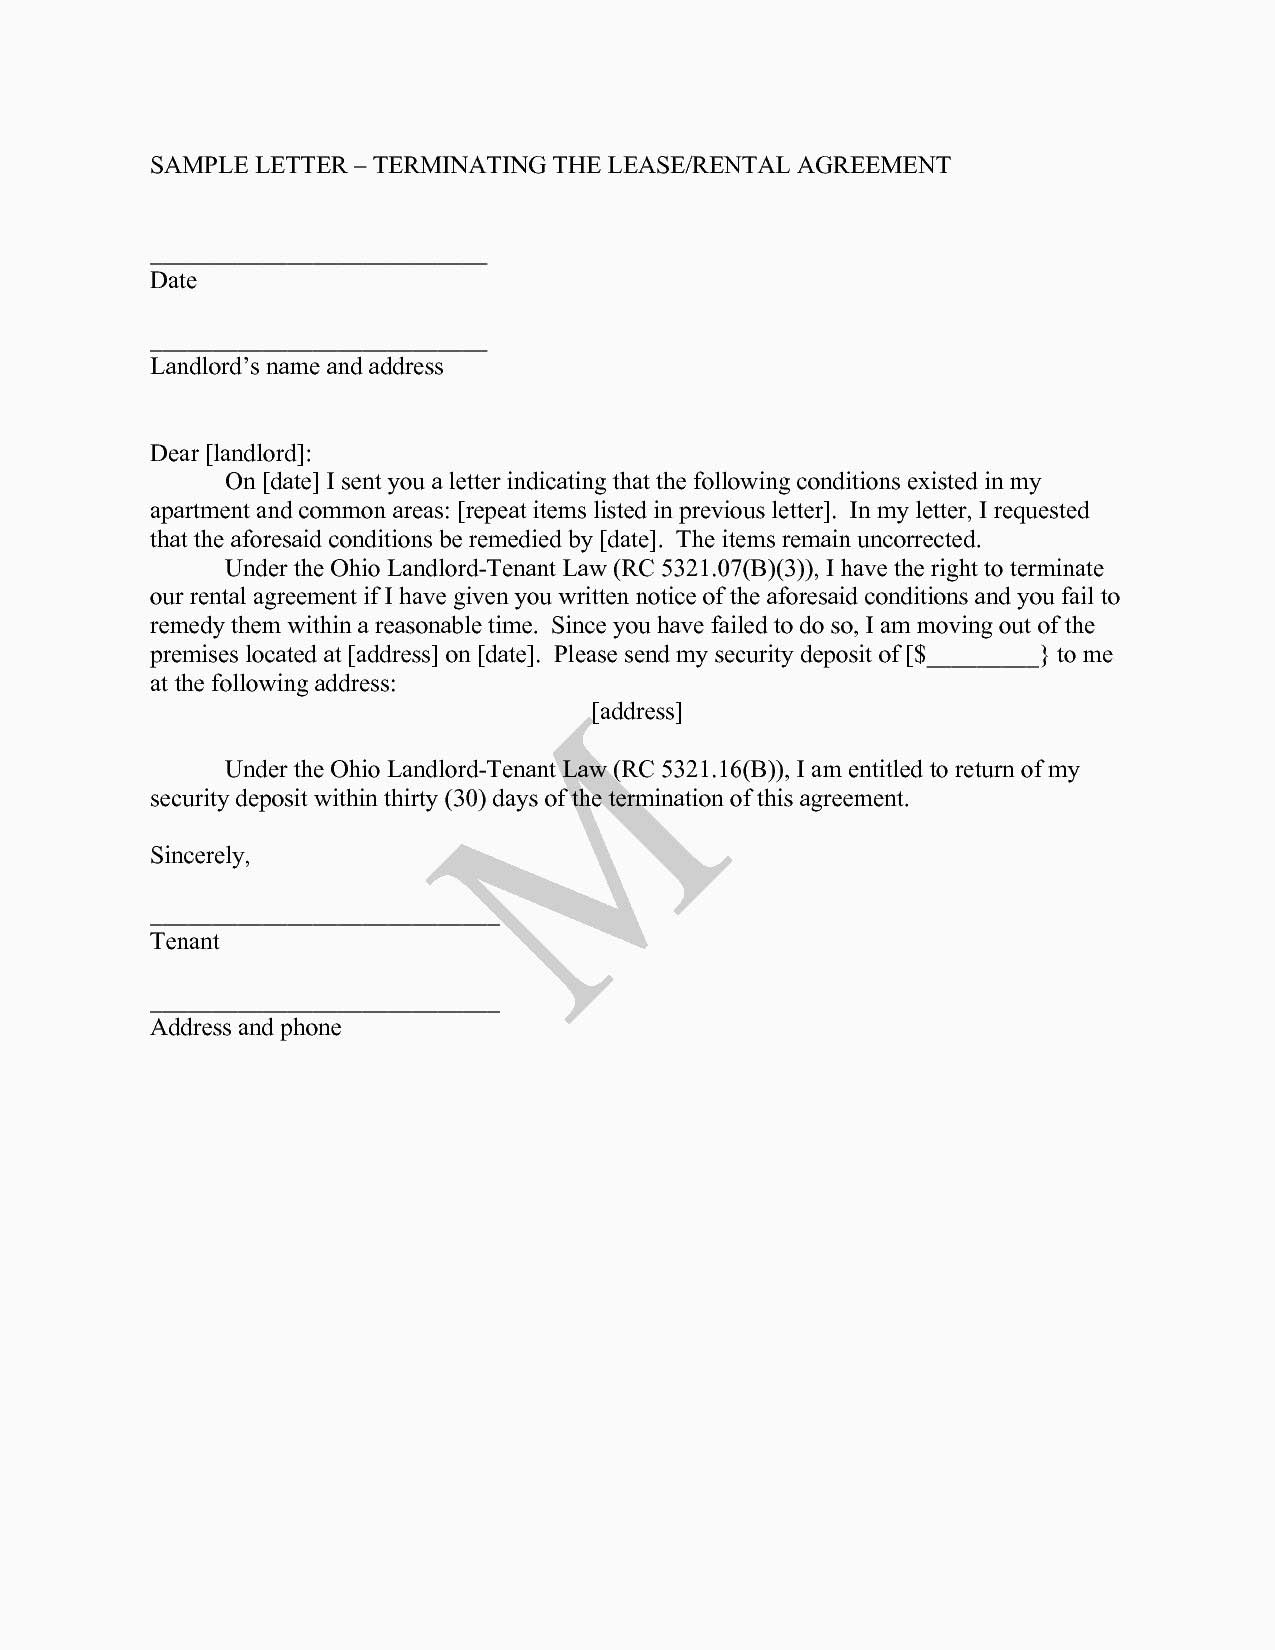 Termination Of Lease Agreement Agreement Letter Format 650841 Rental Agreement Letter New